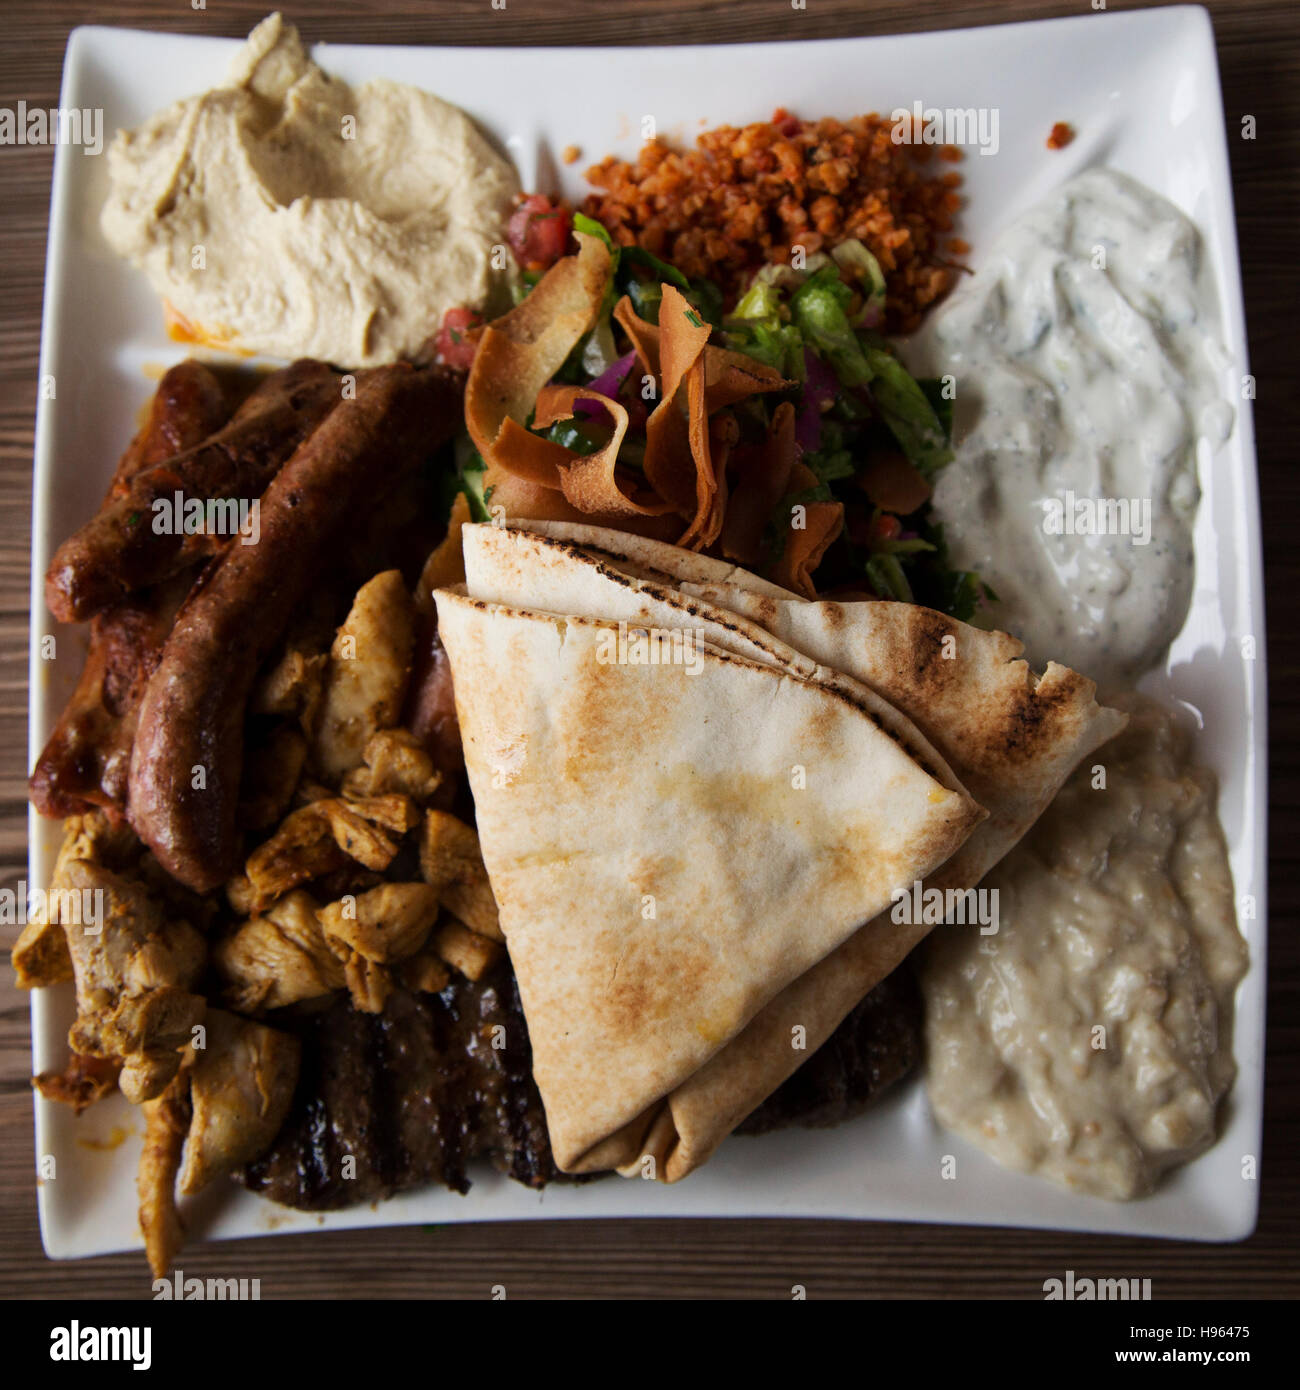 A North African style cuisine served in the Markthal in Rotterdam, the Netherlands. The platter features a mixed grill of meats, a salad and dips. Stock Photo